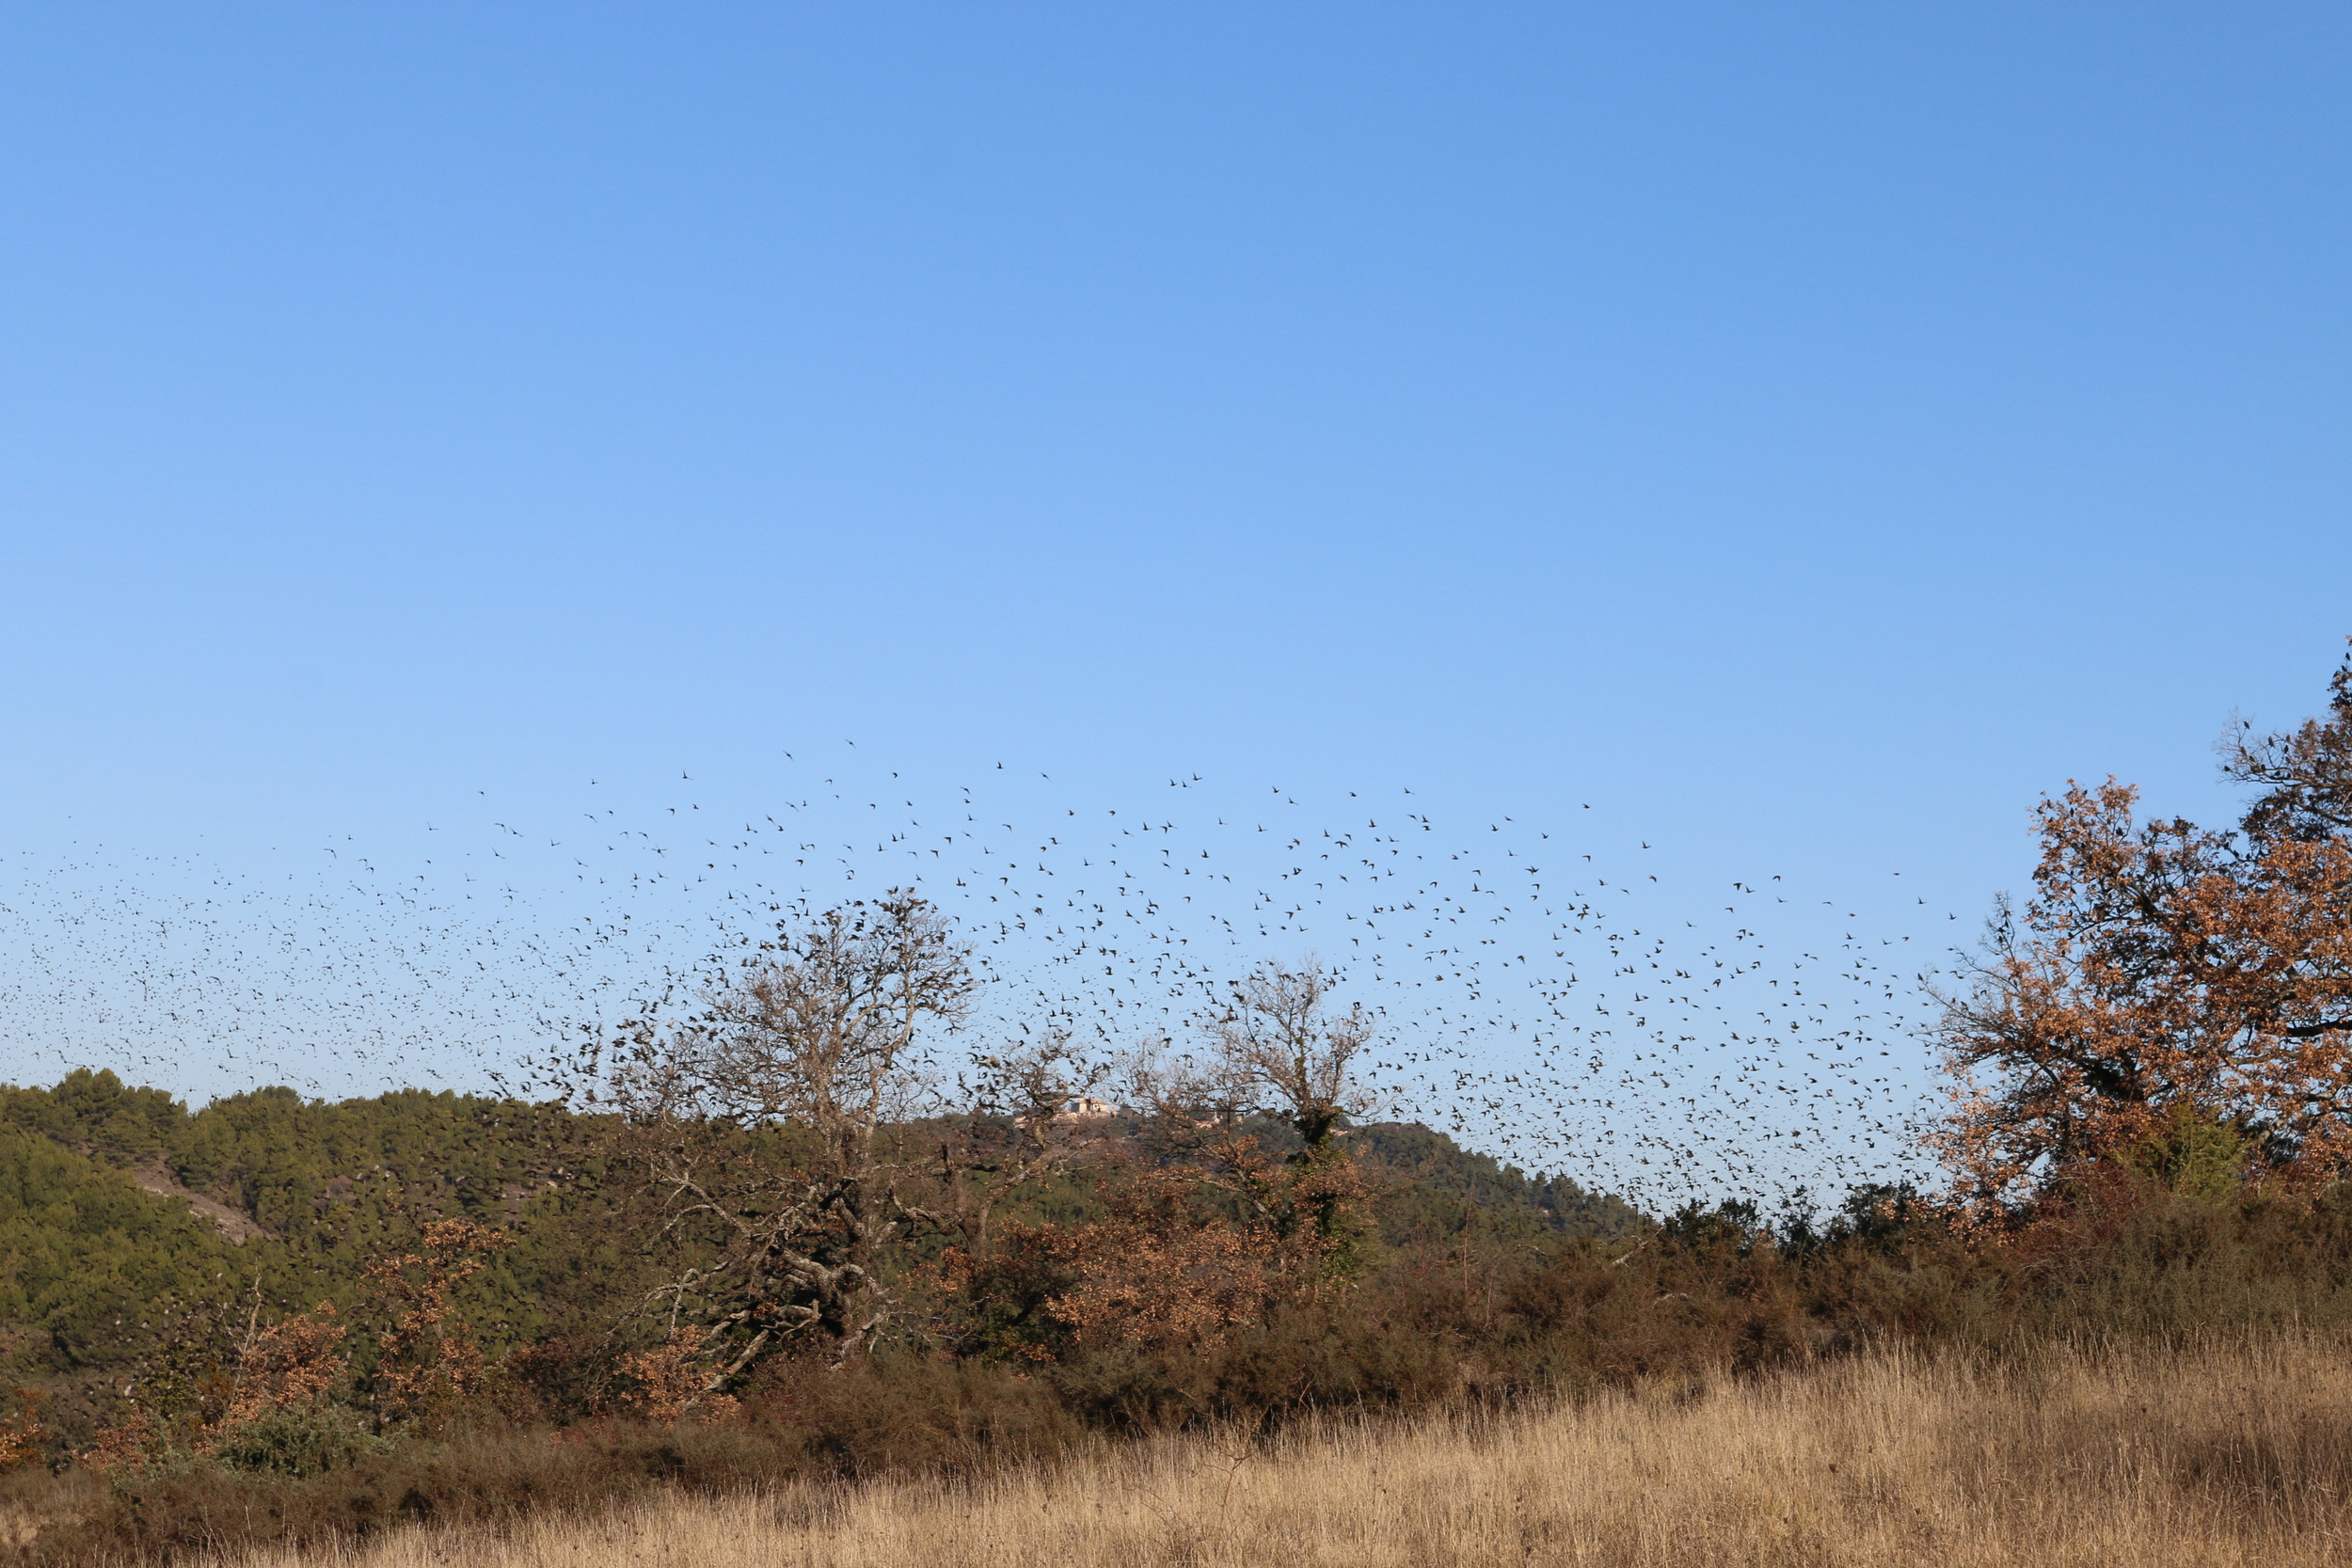 Thousands of starlings in the vineyards outside.